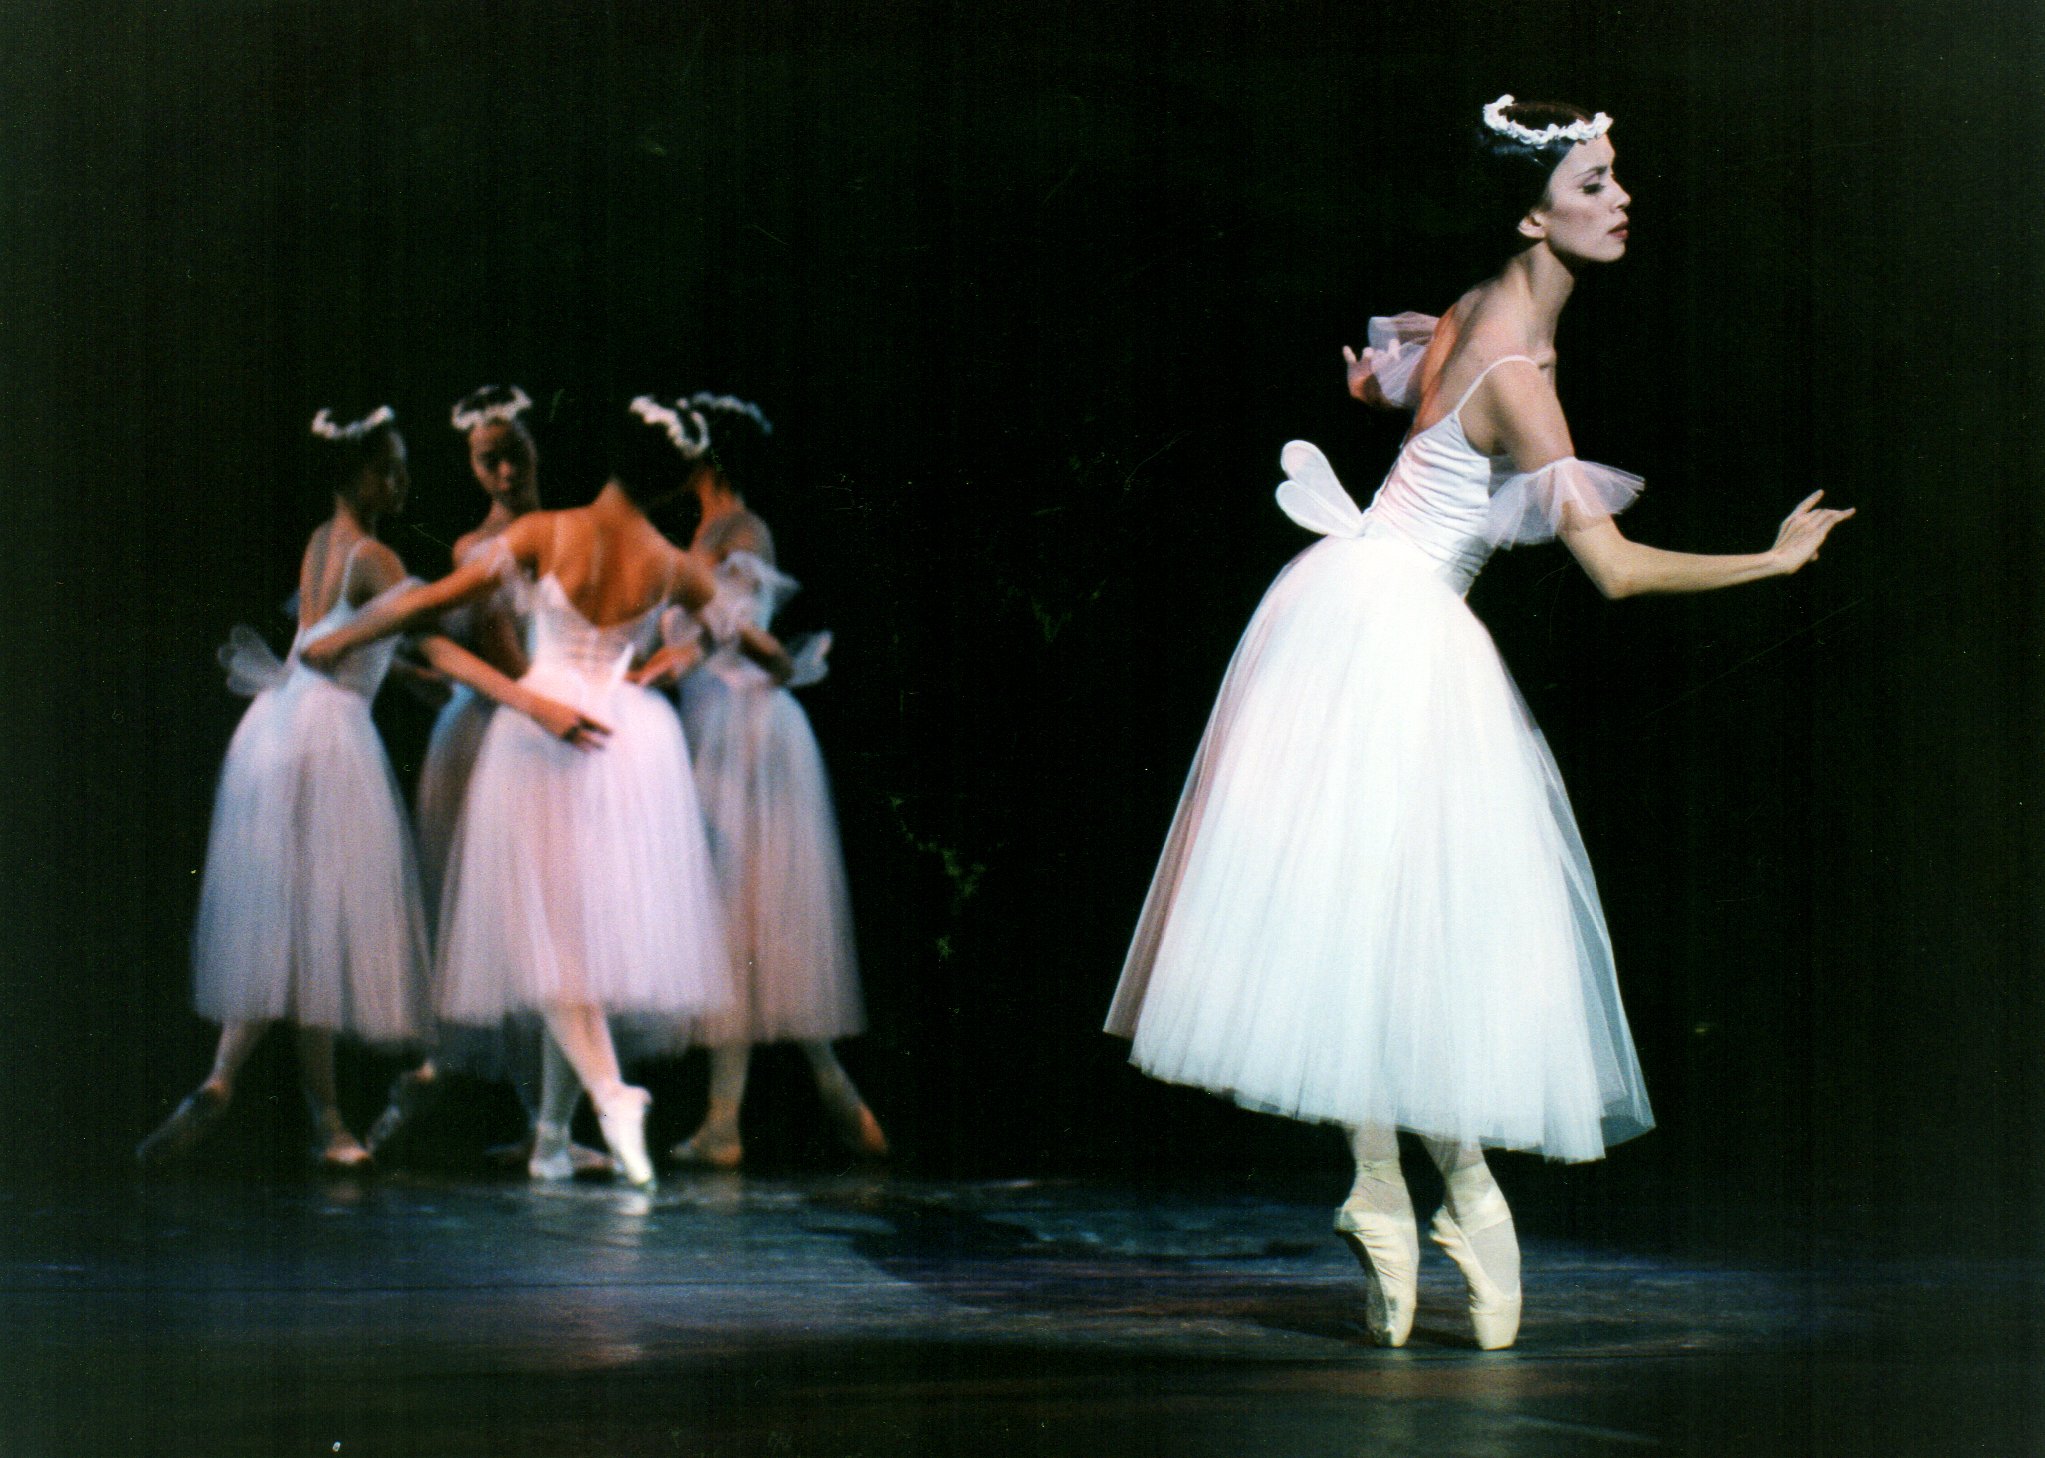    Melanie Motus exudes otherworldly lightness and grace as one of the fairy-like beings in  Les Sylphides  (2000). The Michael Fokine classic is called a “white ballet” – understandably so, because of what the mostly female cast is swathed in. Photo